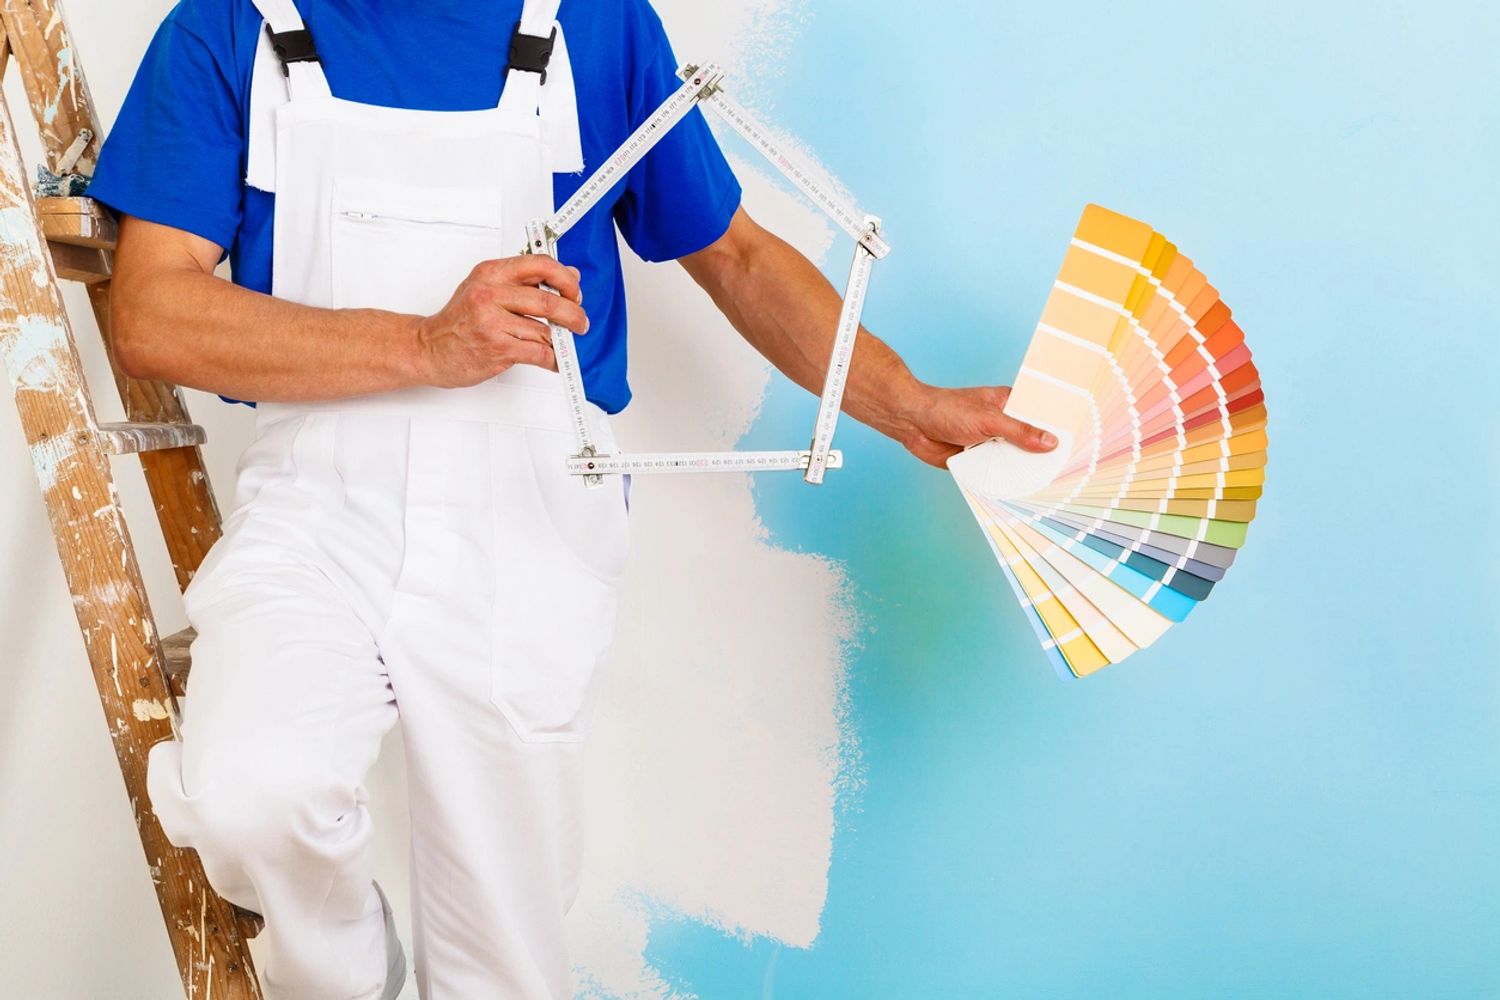 Fresco Painting- Painting Contractor near Pensacola, FL.  Interior and Exterior Painting Services